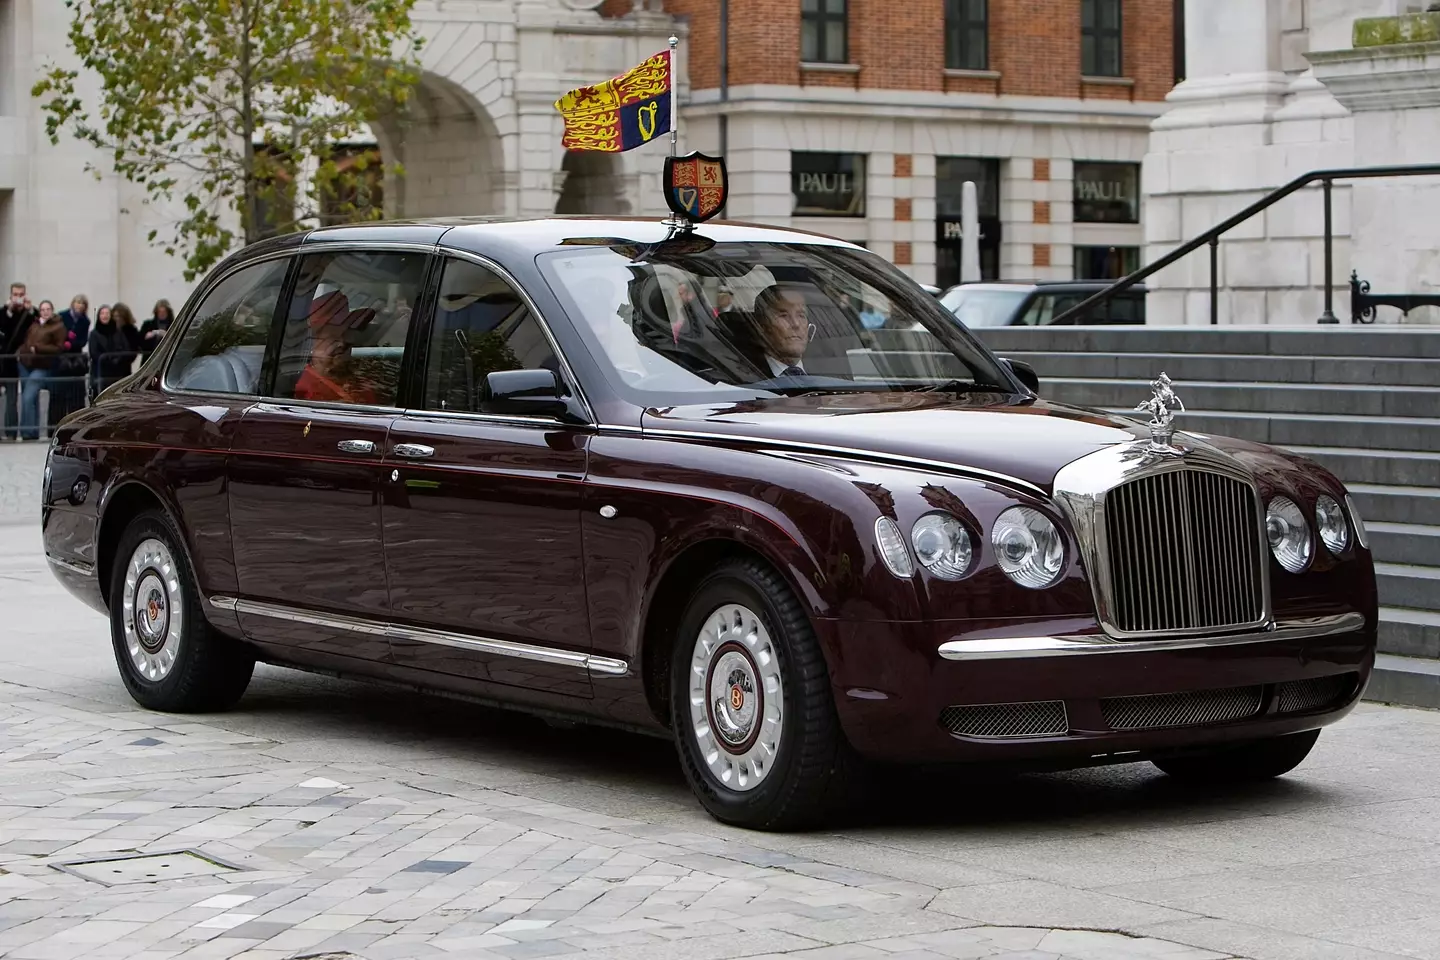 Back in 2002, the monarch was gifted a £10 million Bentley State Limousine to mark her Golden Jubilee.